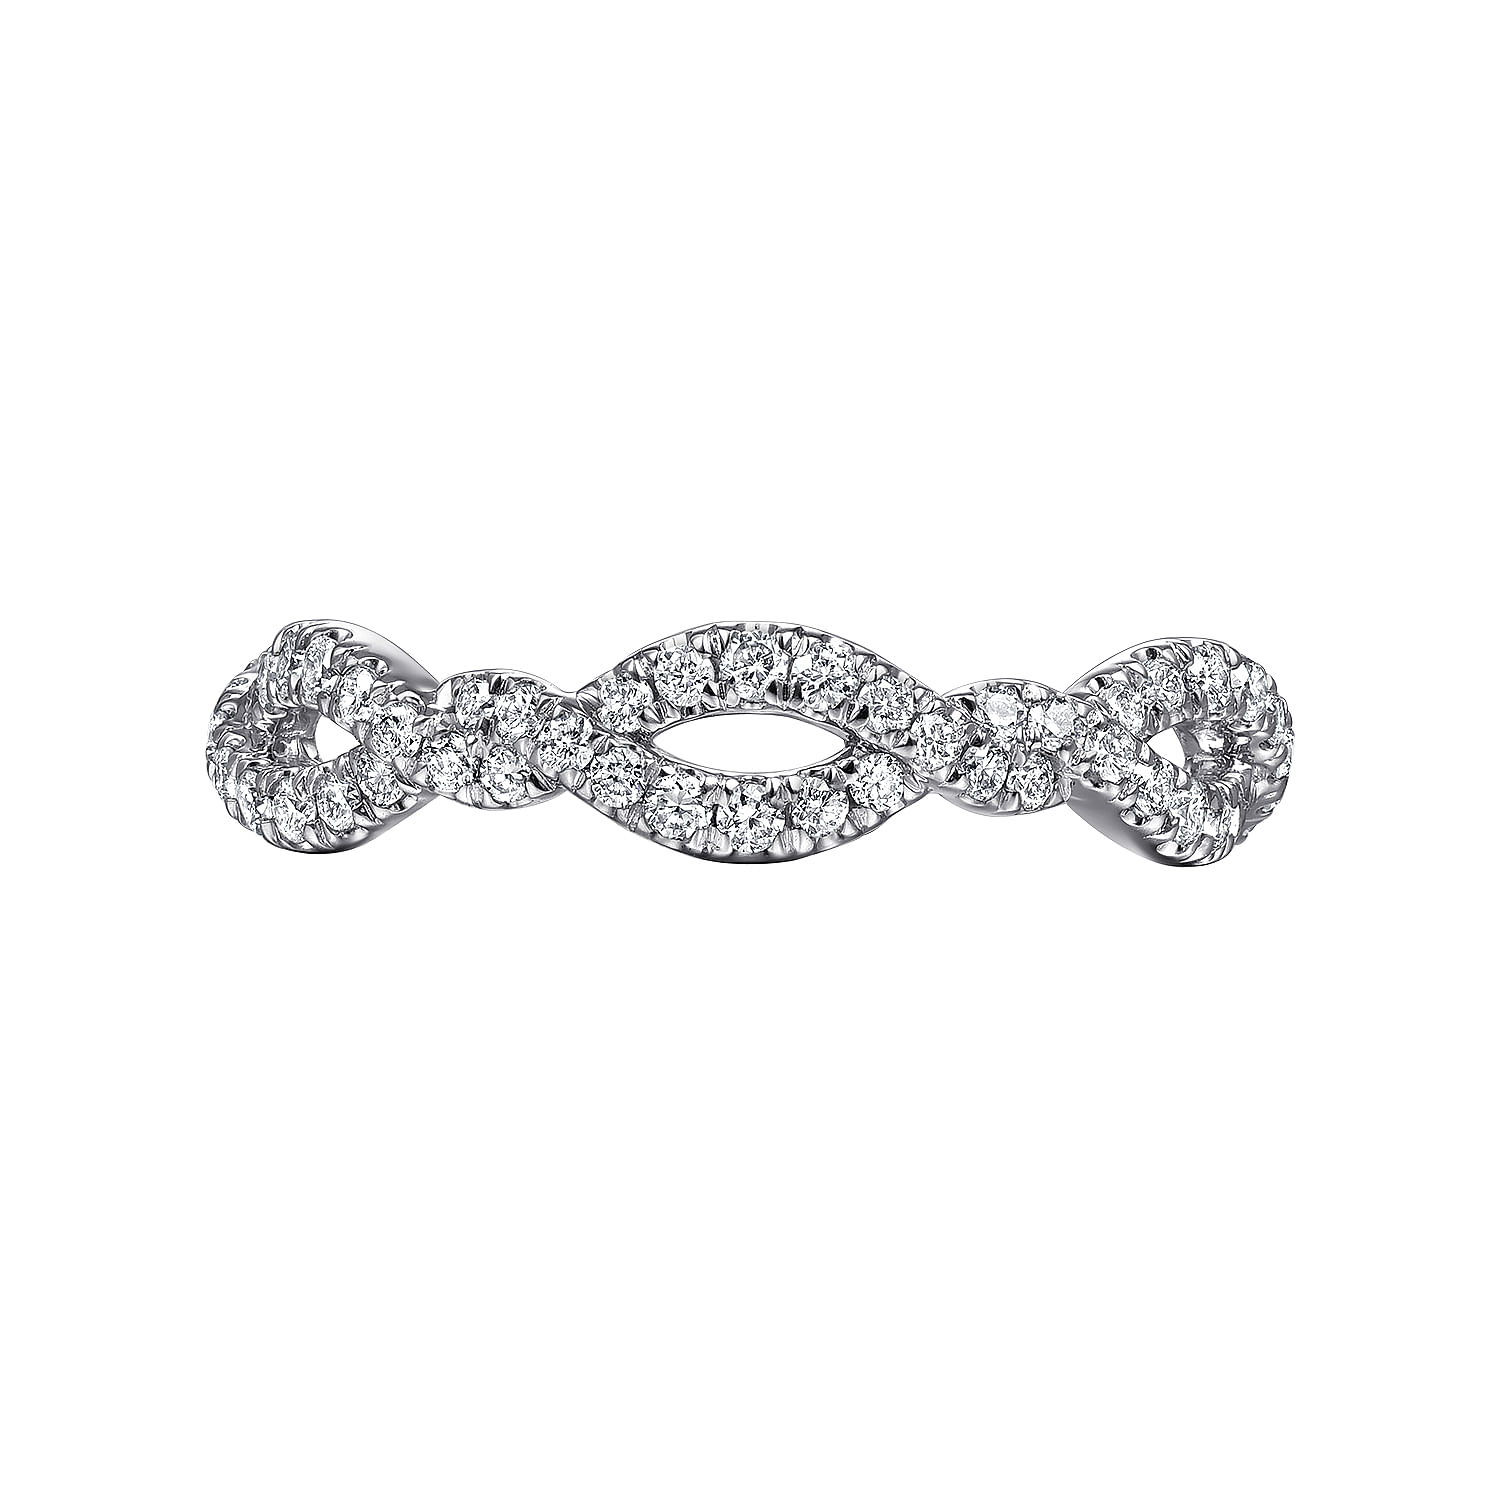 14K White Gold Twisted Pavé Diamond Stackable Ring